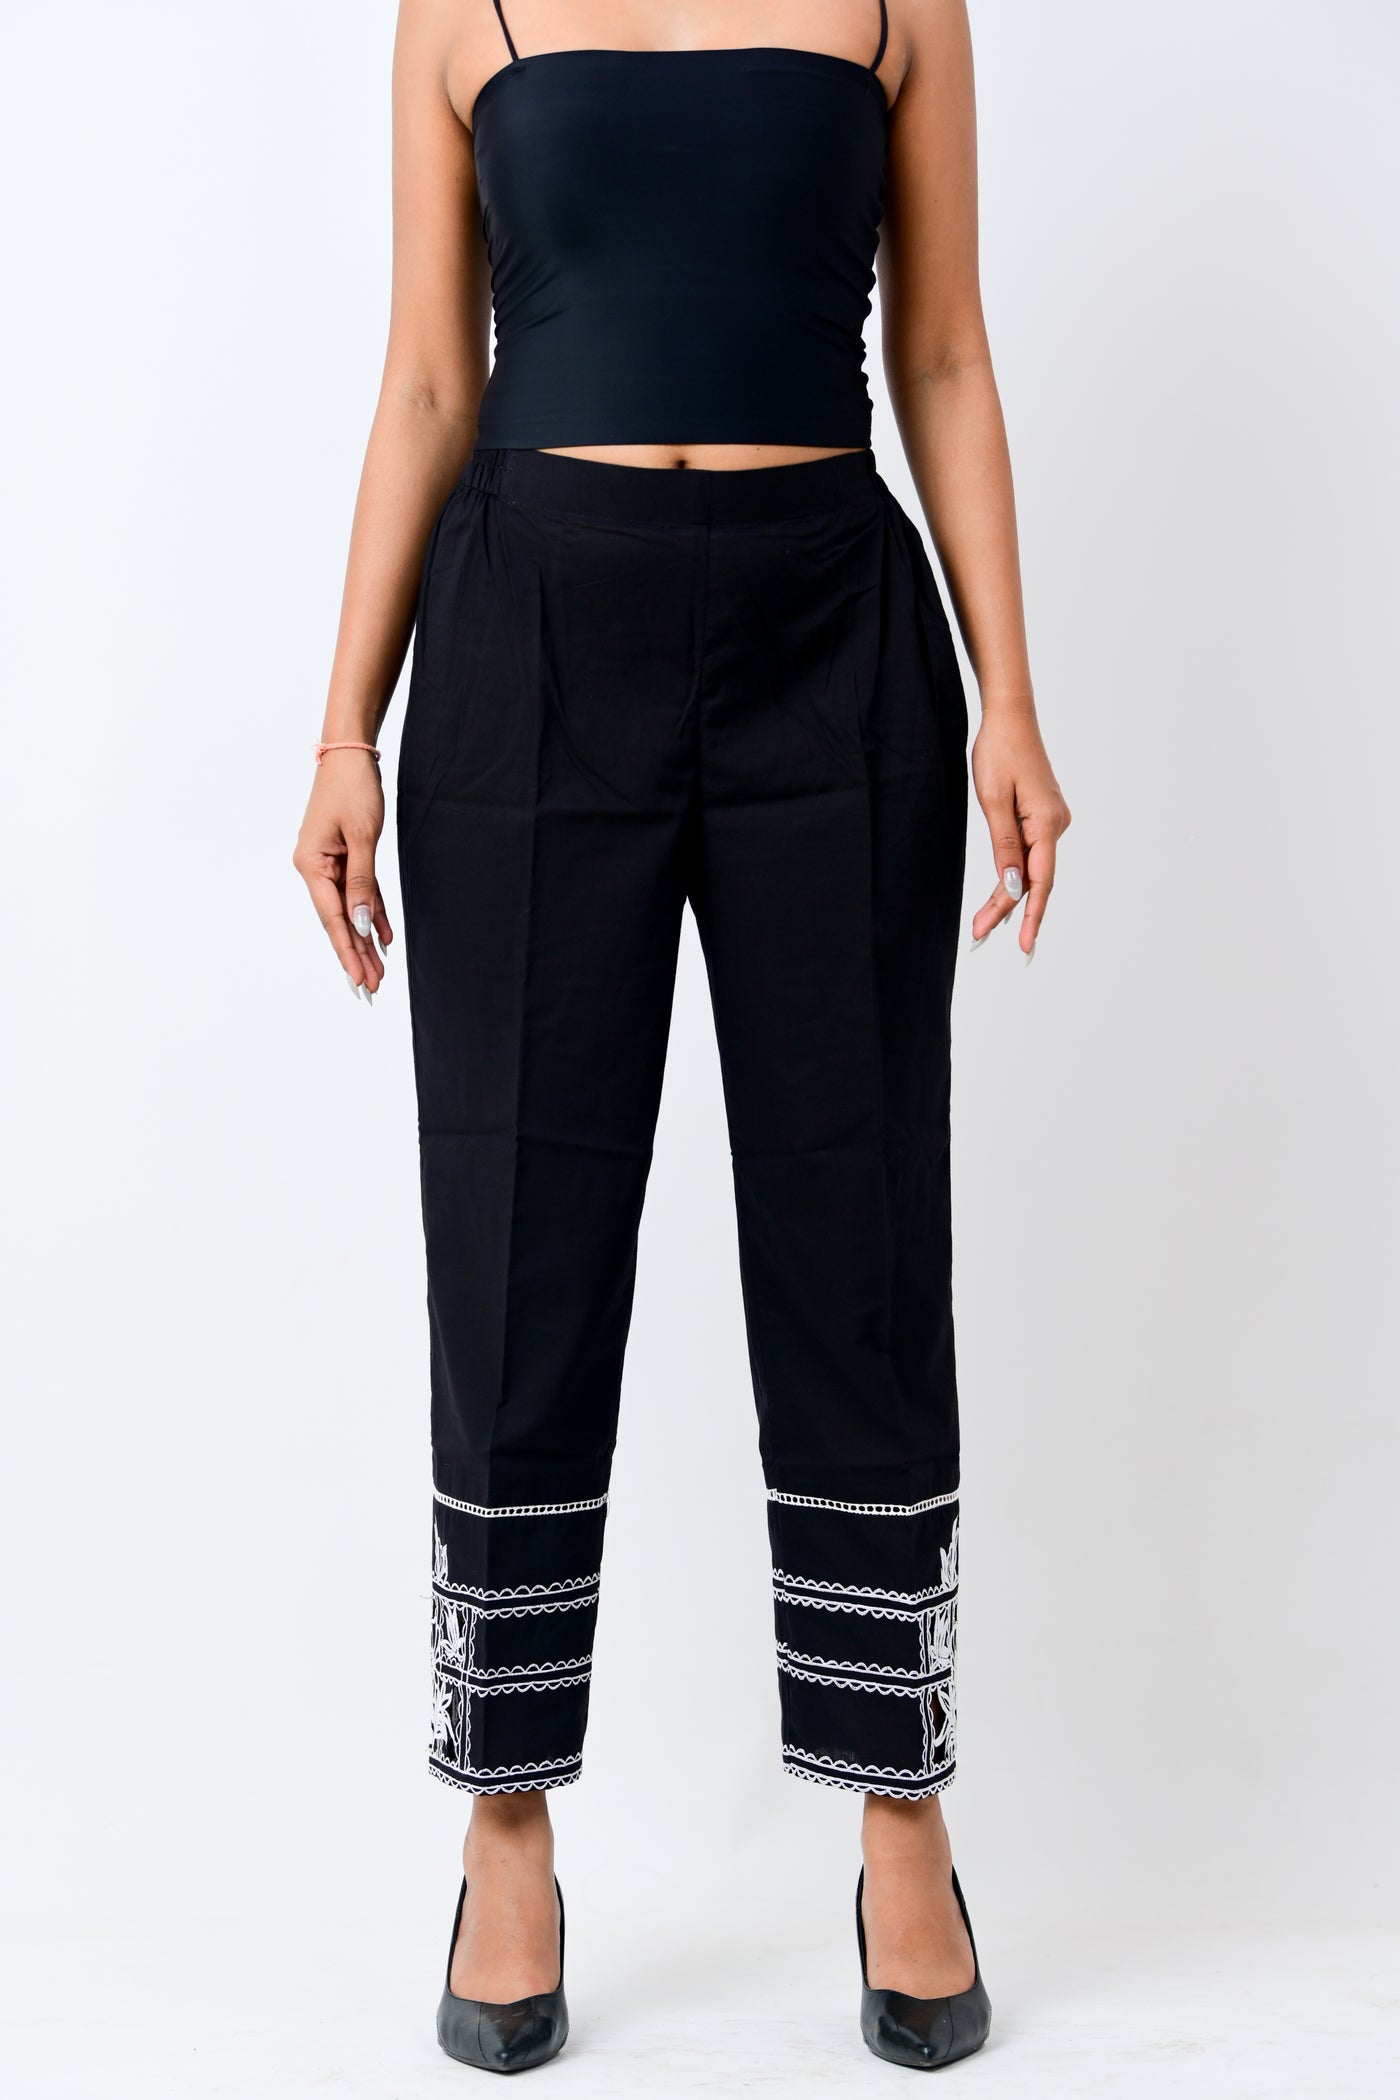 Checkered Embroidered pants-shopsneh